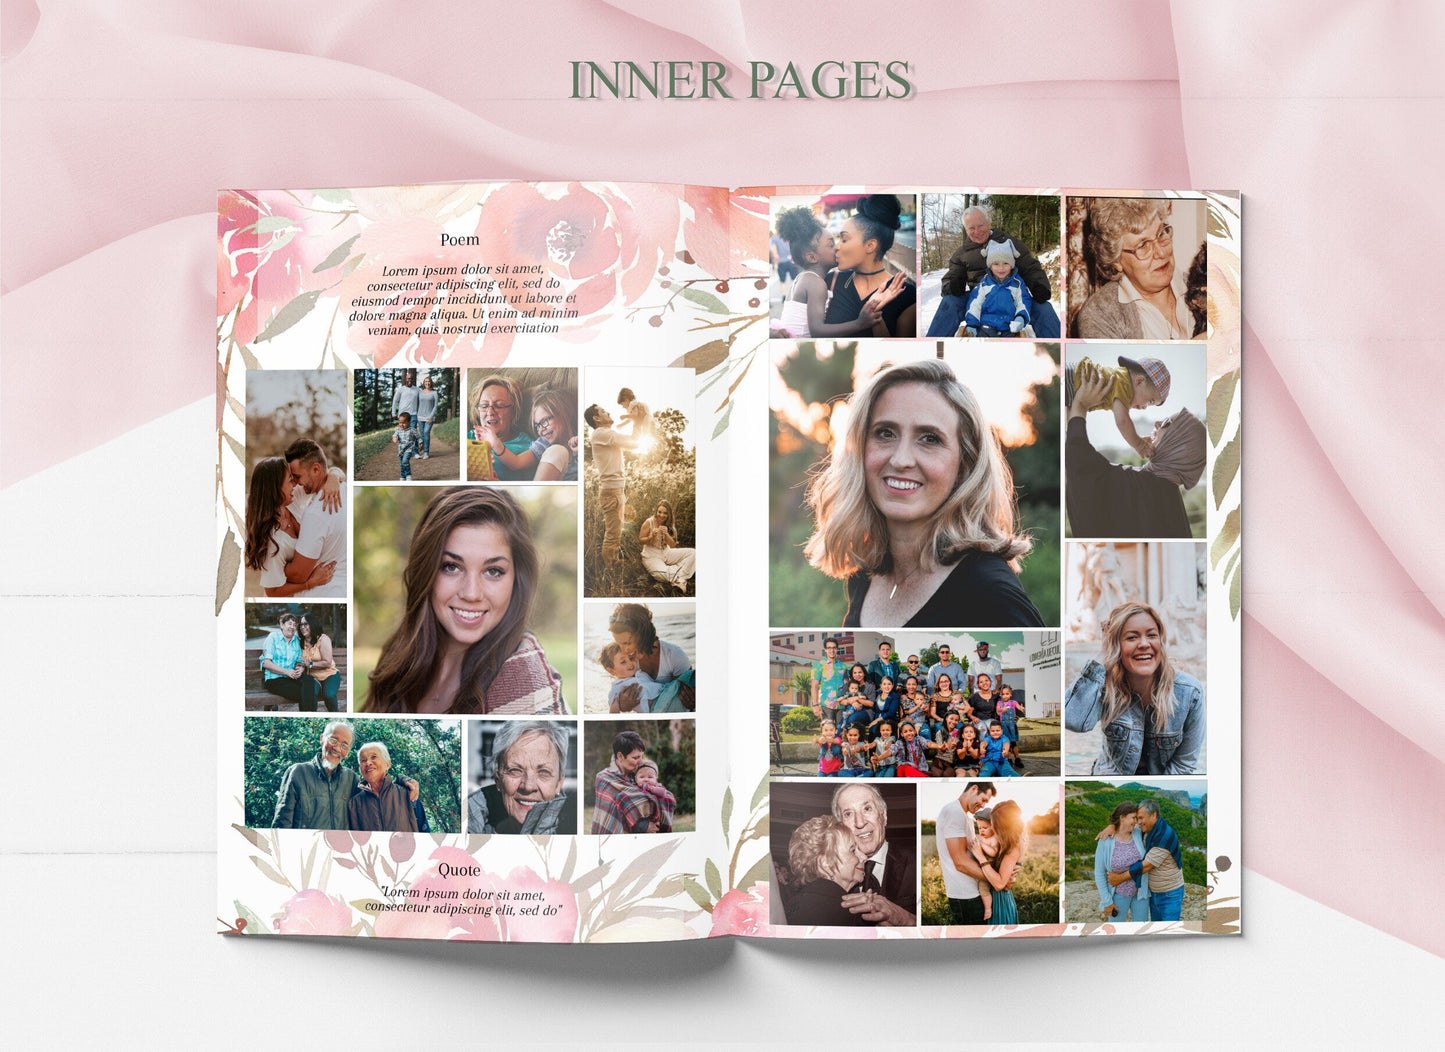 Pink Funeral Program Template for Woman | Obituary Template to Honor Your Loved One | Pink Floral Celebration of Life | A104